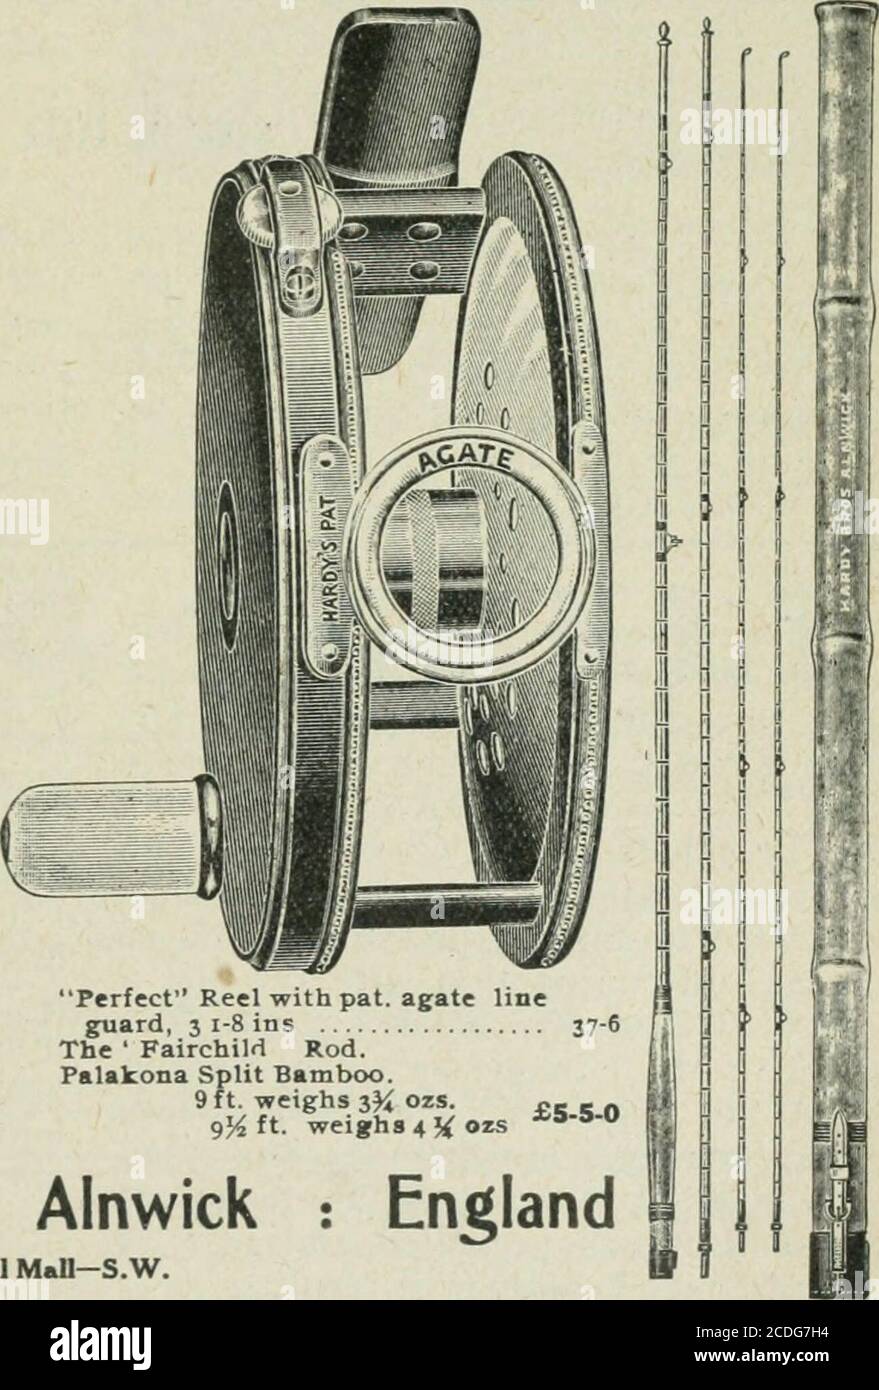 https://c8.alamy.com/comp/2CDG7H4/rod-and-gun-englands-great-fishing-rod-reel-and-tackle-manufacturerswill-mail-you-their-large-illustrated!-catalogue-free!-it-will-pay-you-to-import-as-you-get-the-highest-class-fishing-rods-and-tackle-the-world-has-ever-seen-hards-palakona-split-bamboo-rods-are-the-lightest-andstrongest-made-hardys-alnwick-qreenheart-rods-are-superior-to-all-others-hardys-perfect-reel-with-ball-bearings-and-regulating-checkfitted-with-a-double-tapered-coronaline-make-a-perfect-outfit-complete-hardy-bros-ltd-alnwick-england-london-depot-61-pall-mallsw-perfect-reel-with-pat-agate-hi-g-2CDG7H4.jpg